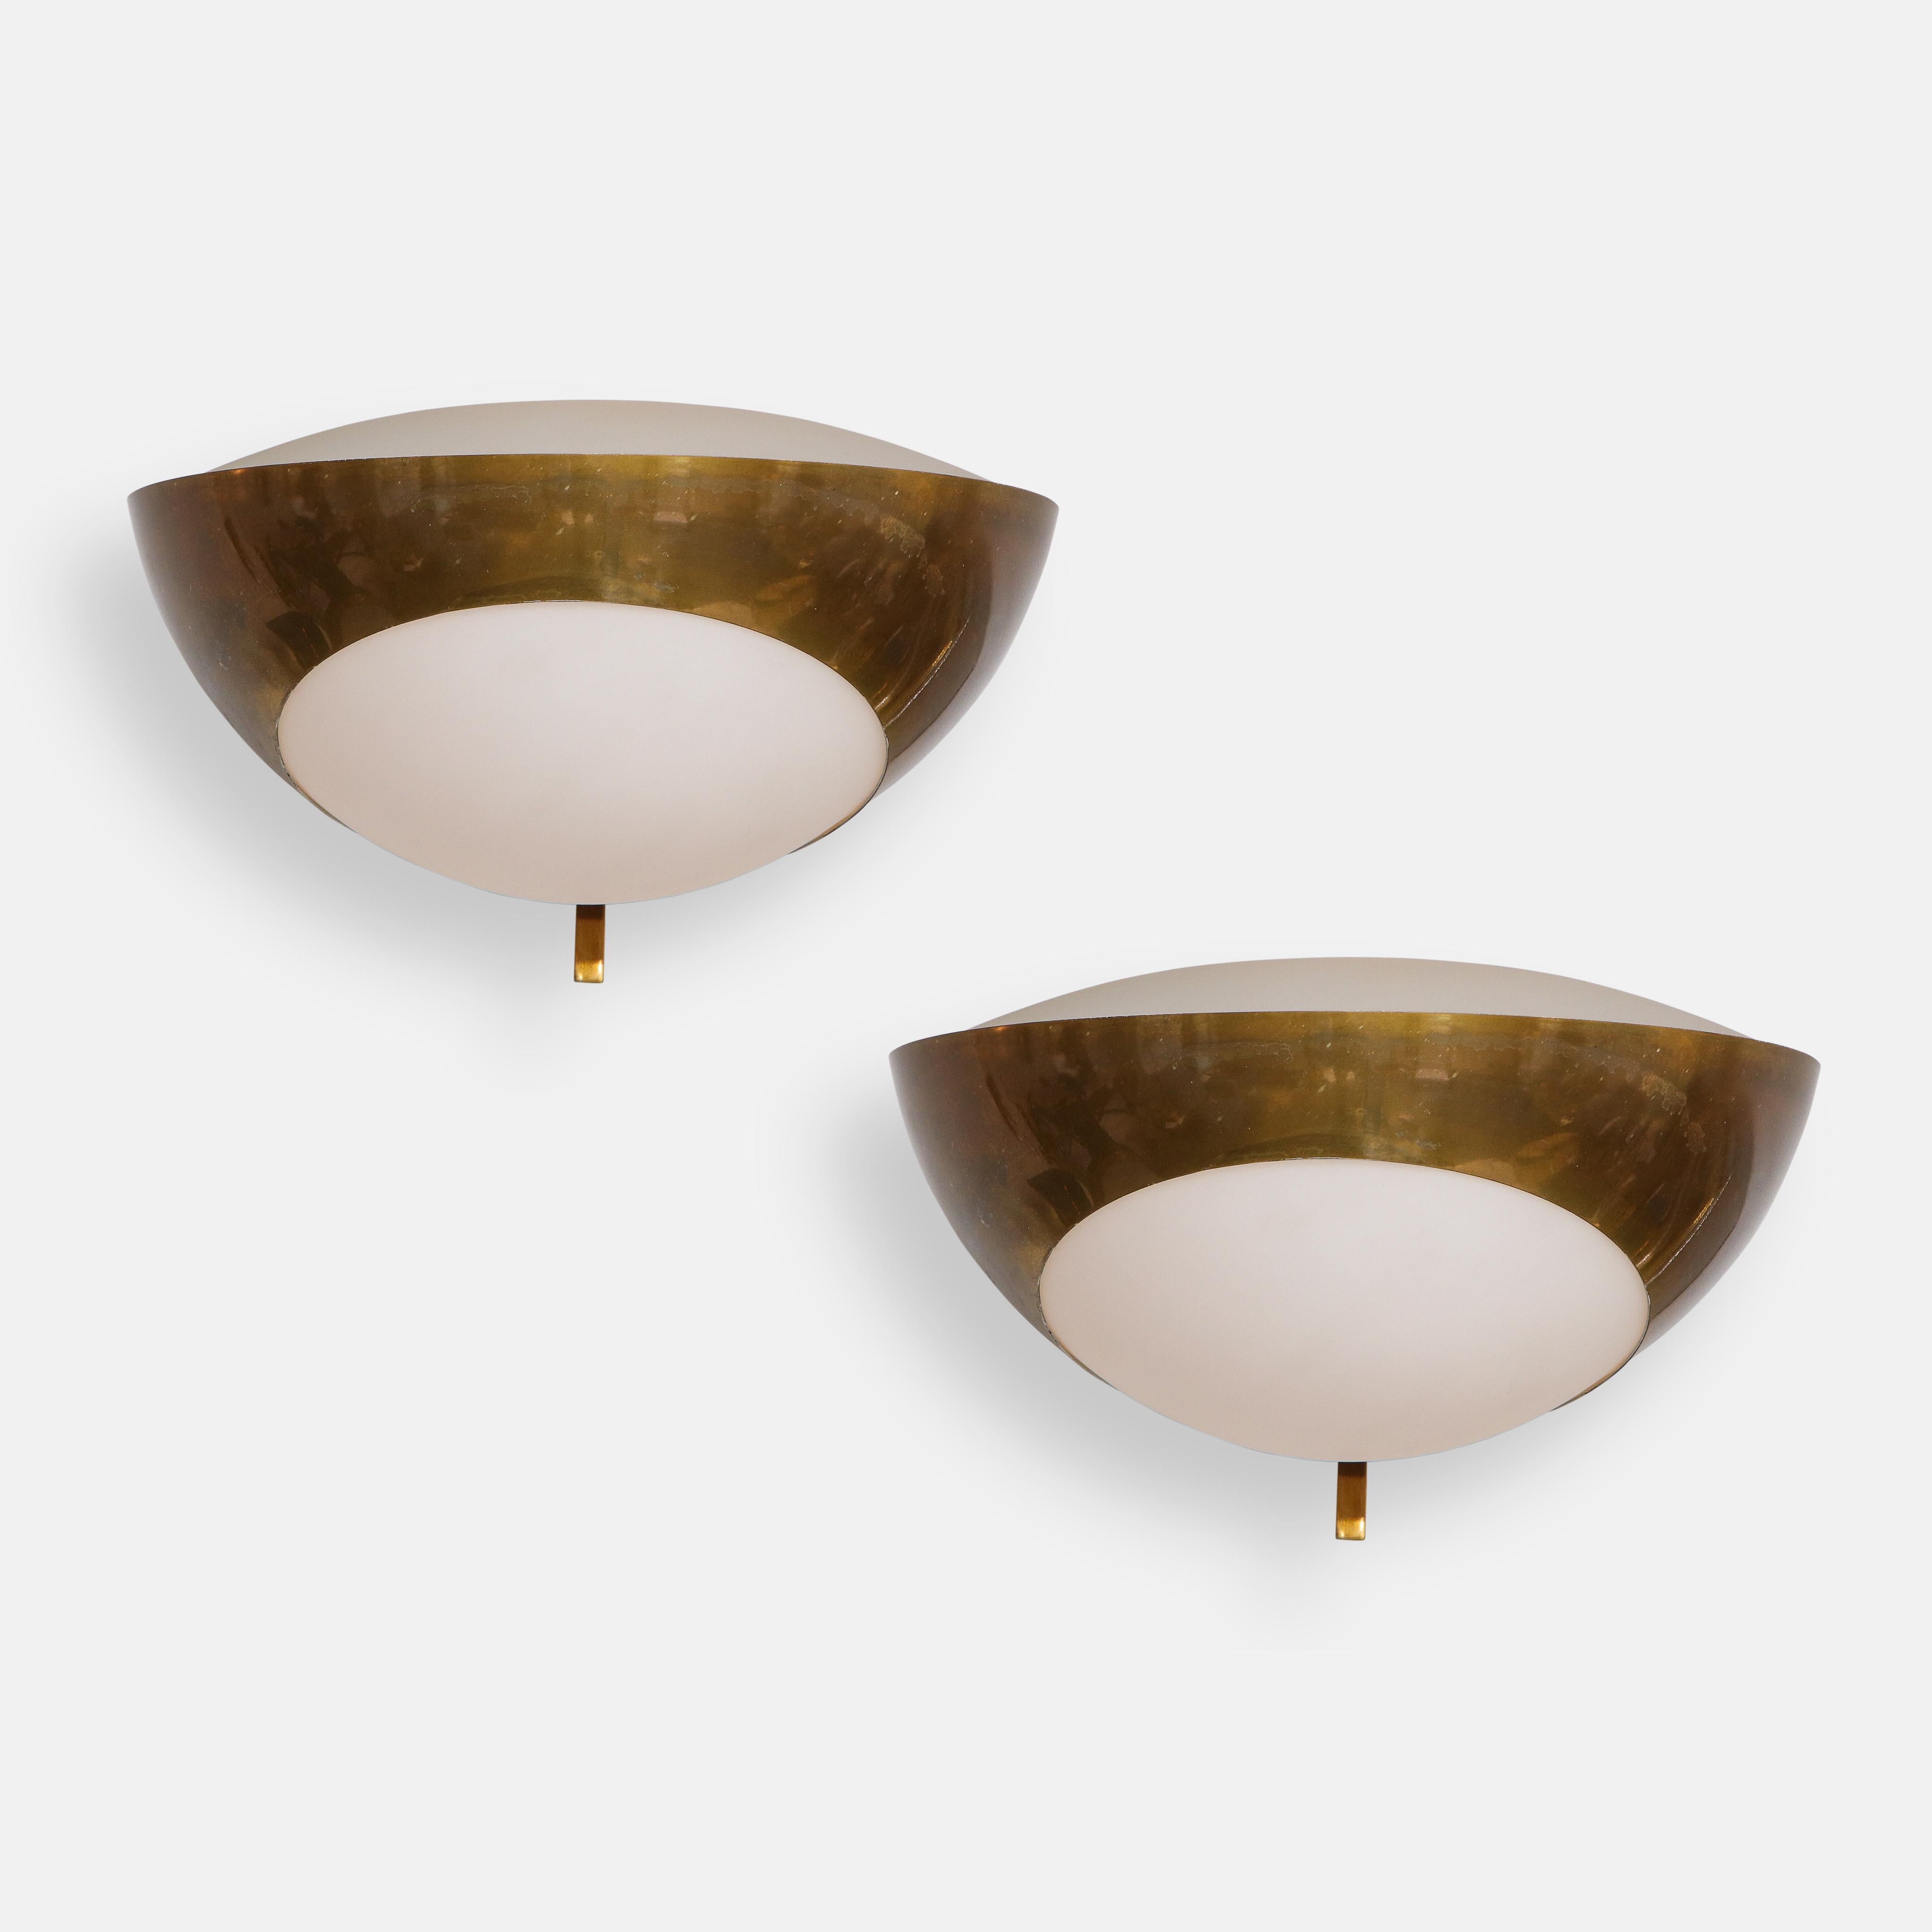 Max Ingrand for Fontana Arte rare set of four large model 1963 sconces, Italy, circa 1960. These exquisite sconces consist of brass structures which hold opaline glass diffusers below and above. This model exudes an elegance and simplicity in its